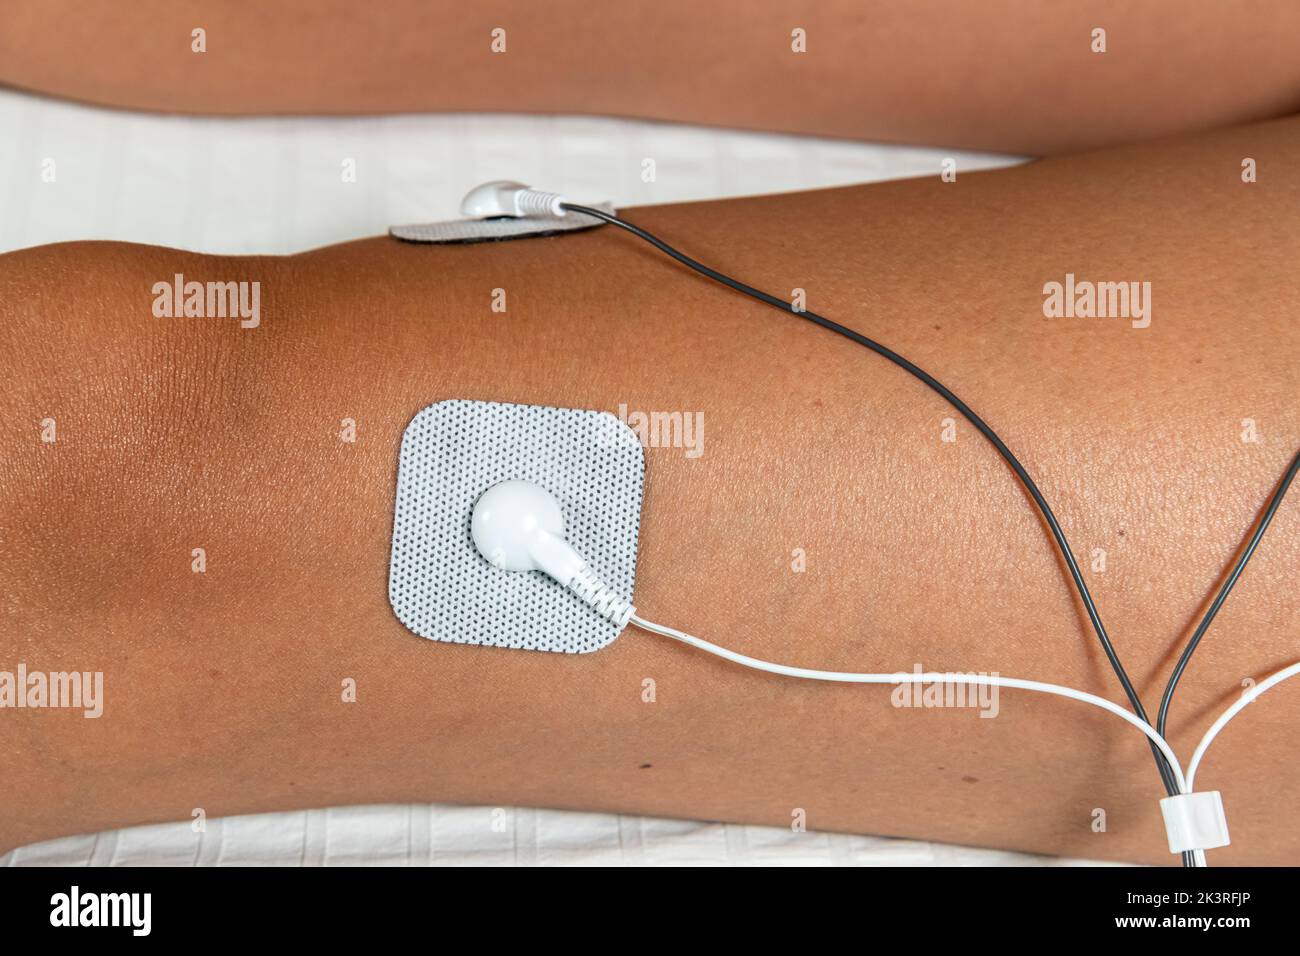 https://c8.alamy.com/comp/2K3RFJP/self-adhesive-electrode-pad-of-tens-transcutaneous-electrical-nerve-stimulation-and-ems-electronic-muscle-stimulation-unit-therapy-machine-2K3RFJP.jpg